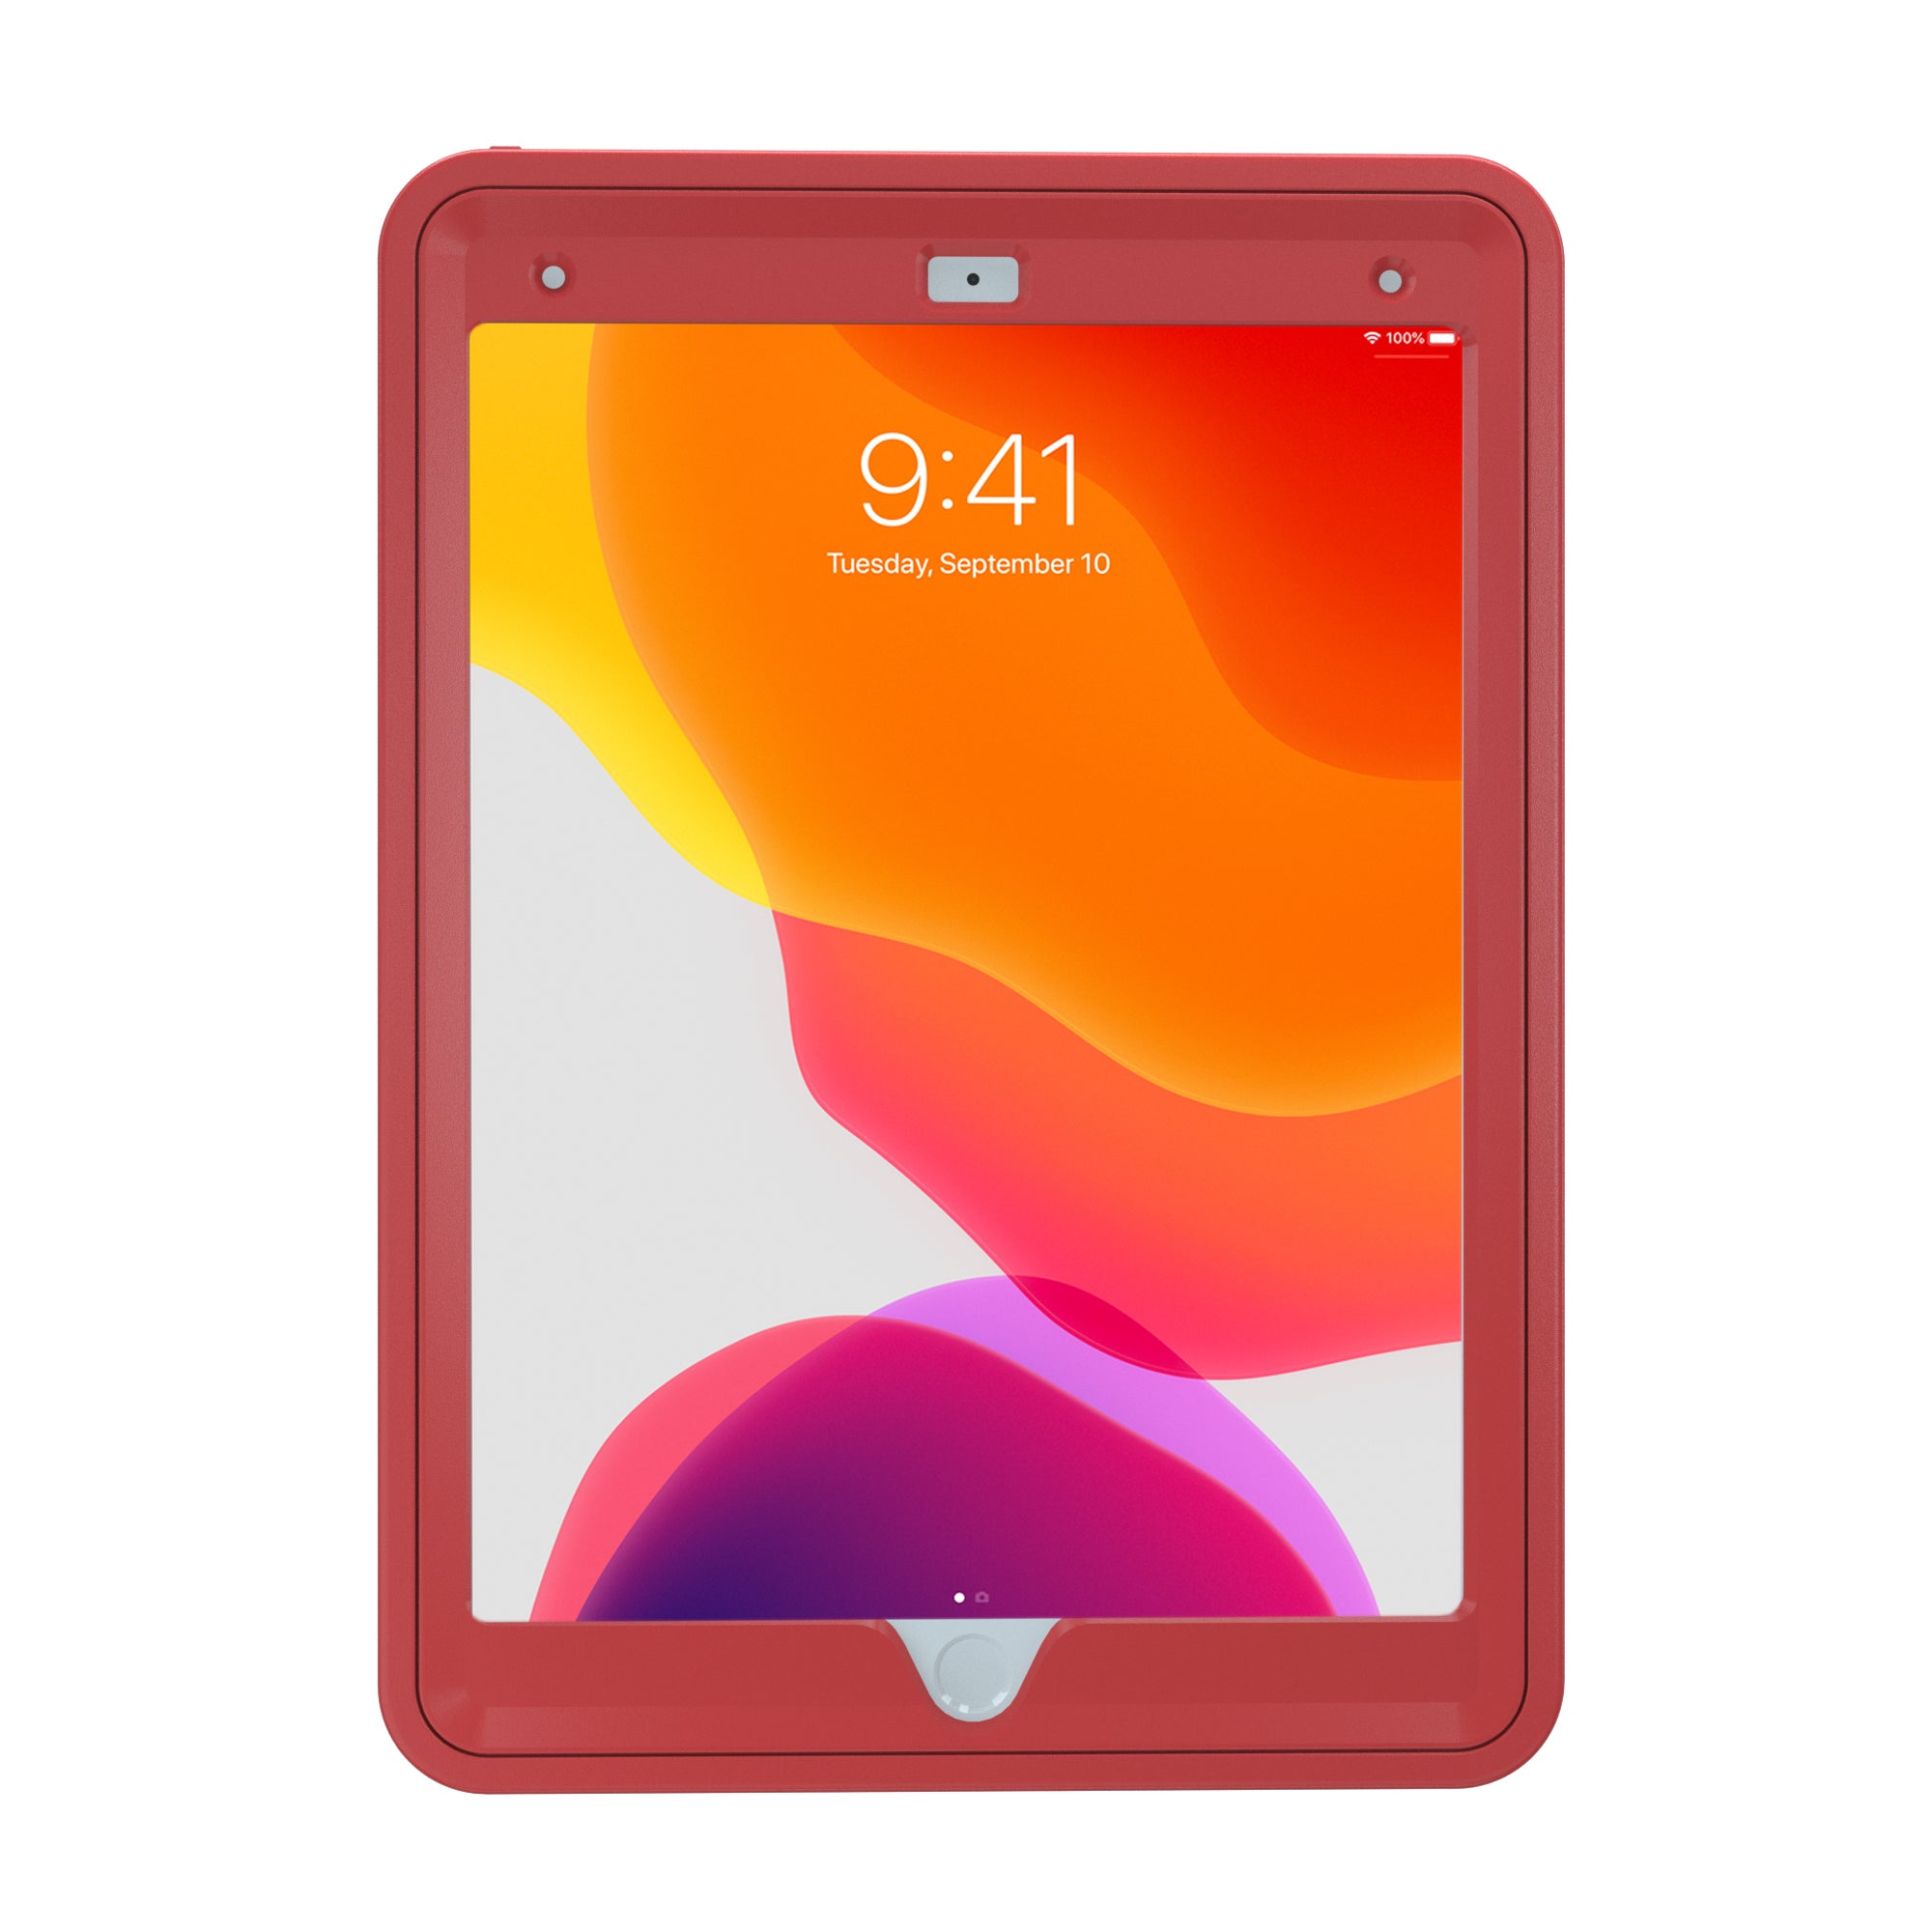 Protective Case with Built-in 360 Degree Rotatable Grip Kickstand for iPad 7th/ 8th/ 9th Gen. 10.2”, iPad Air 3 & iPad Pro 10.5”